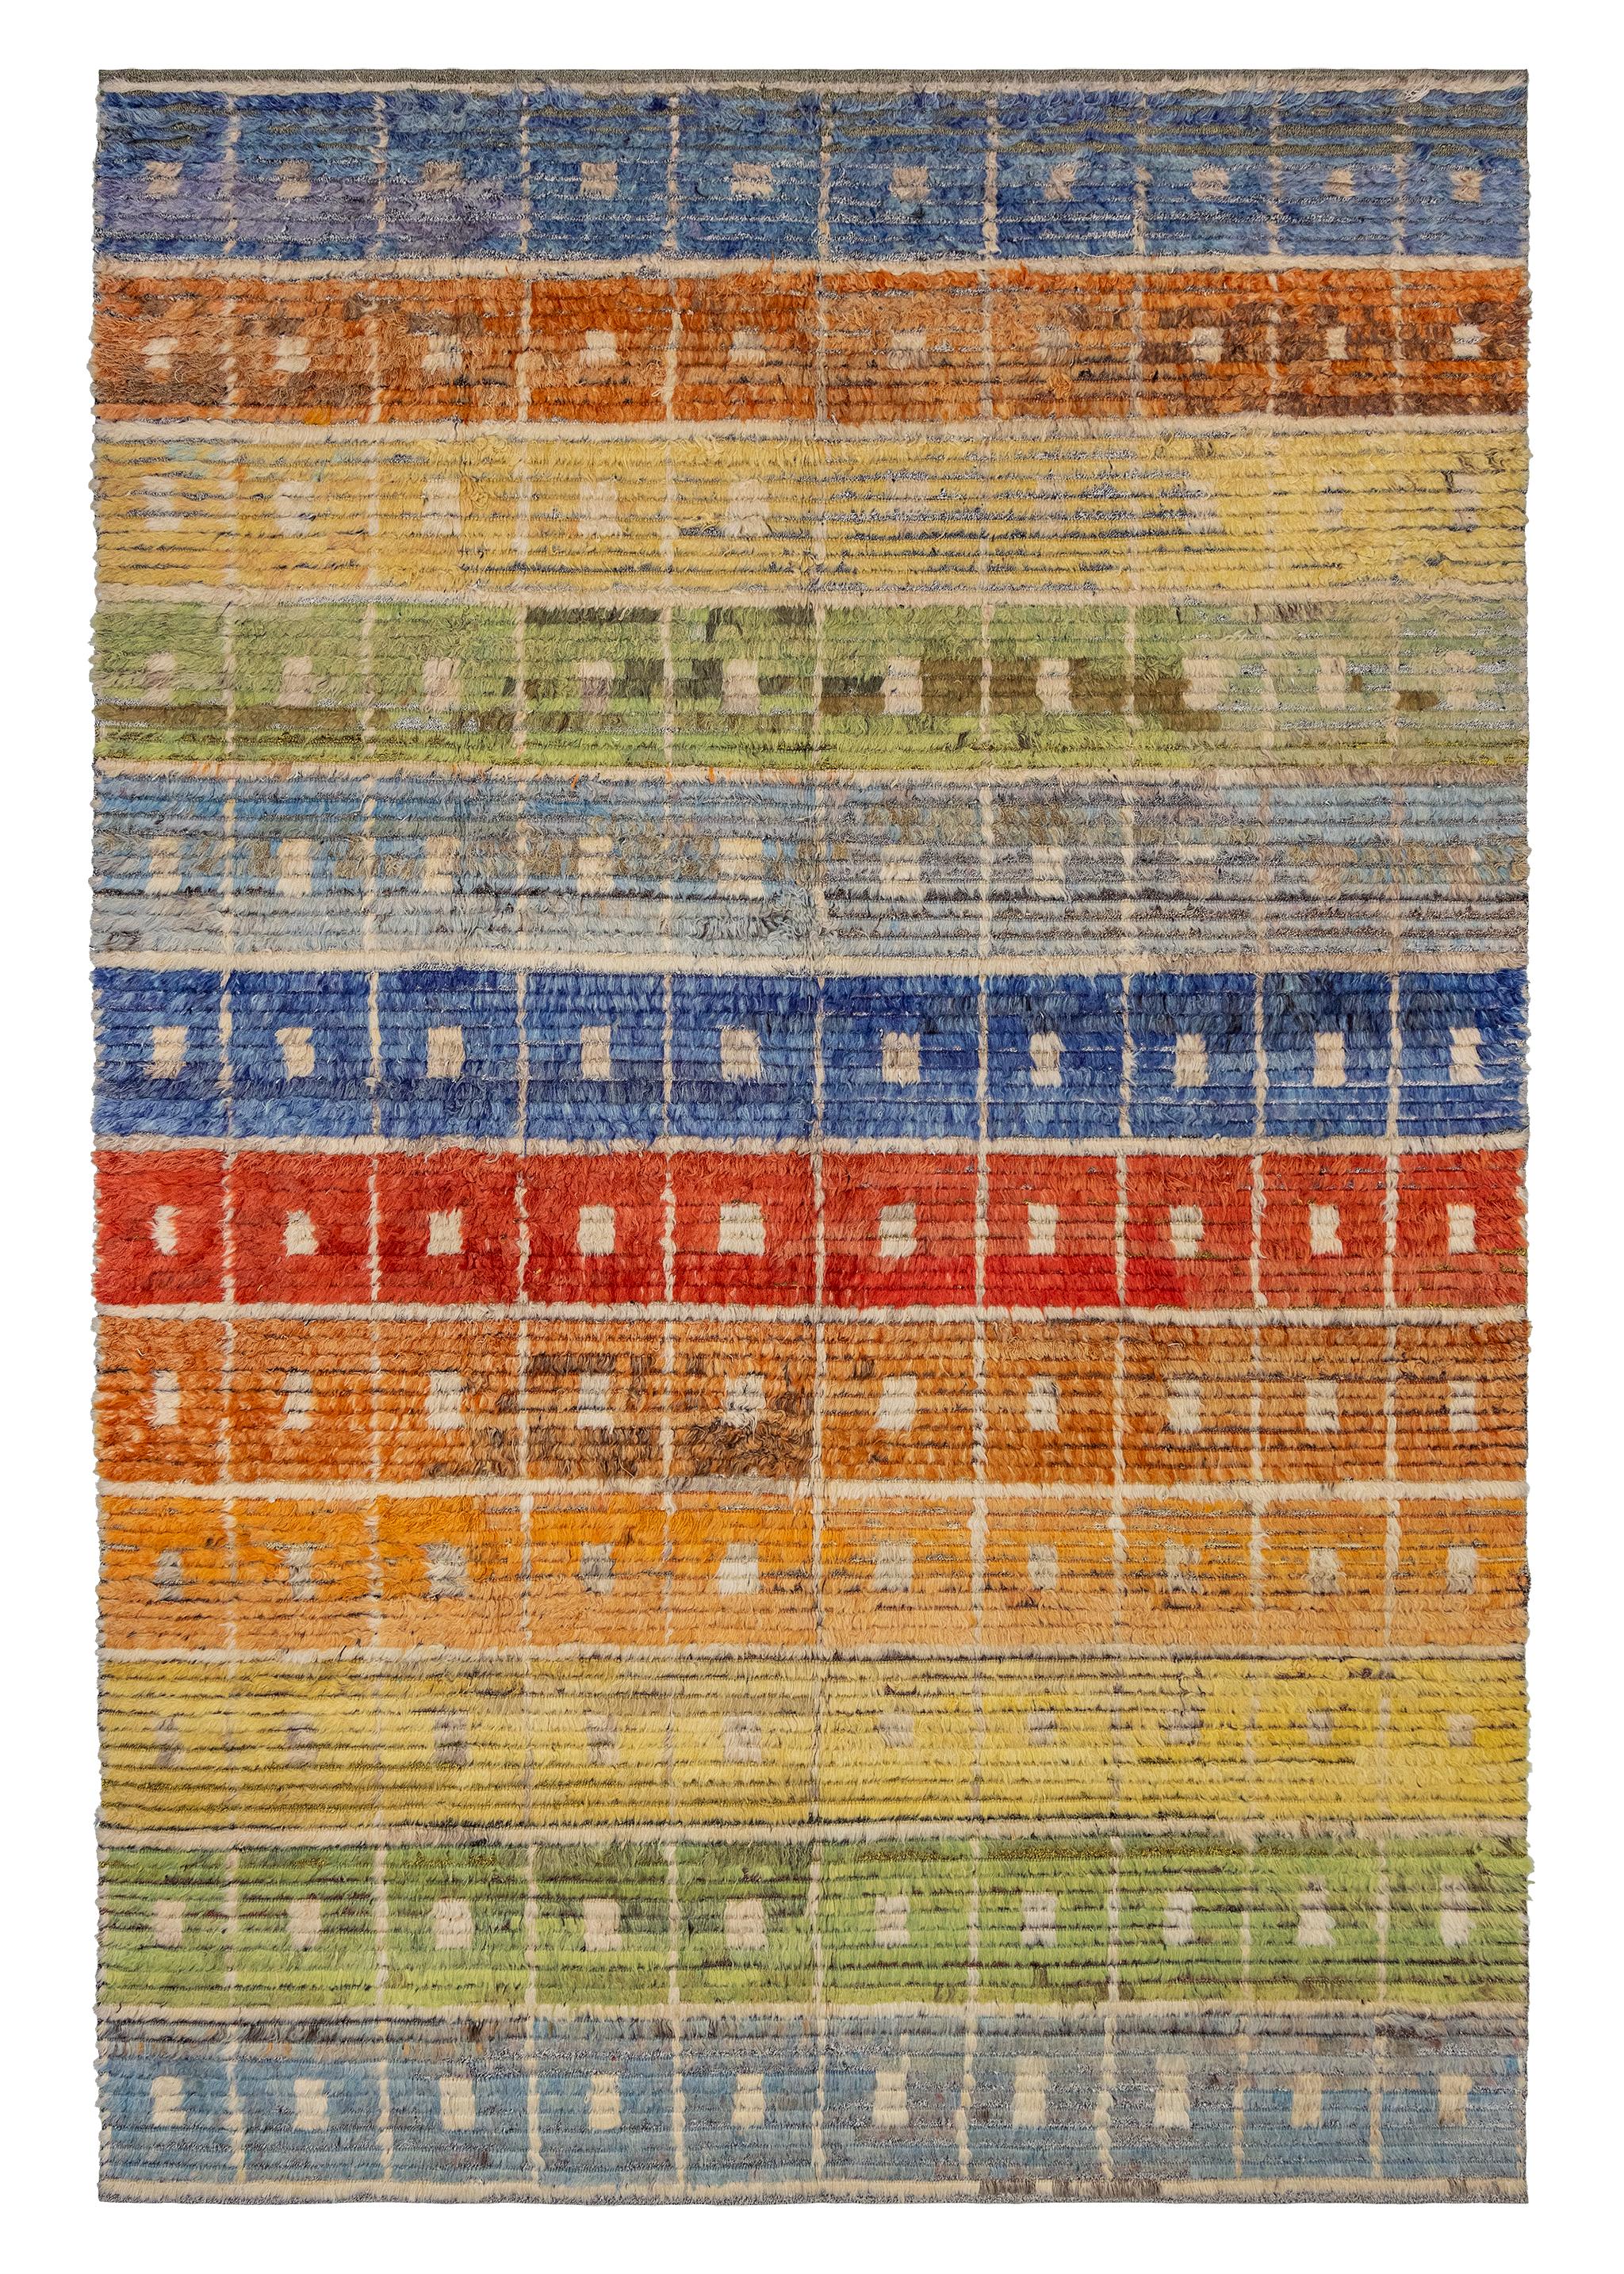 Goat Hair Kilims with Vintage Wool Knotting from Turkey.